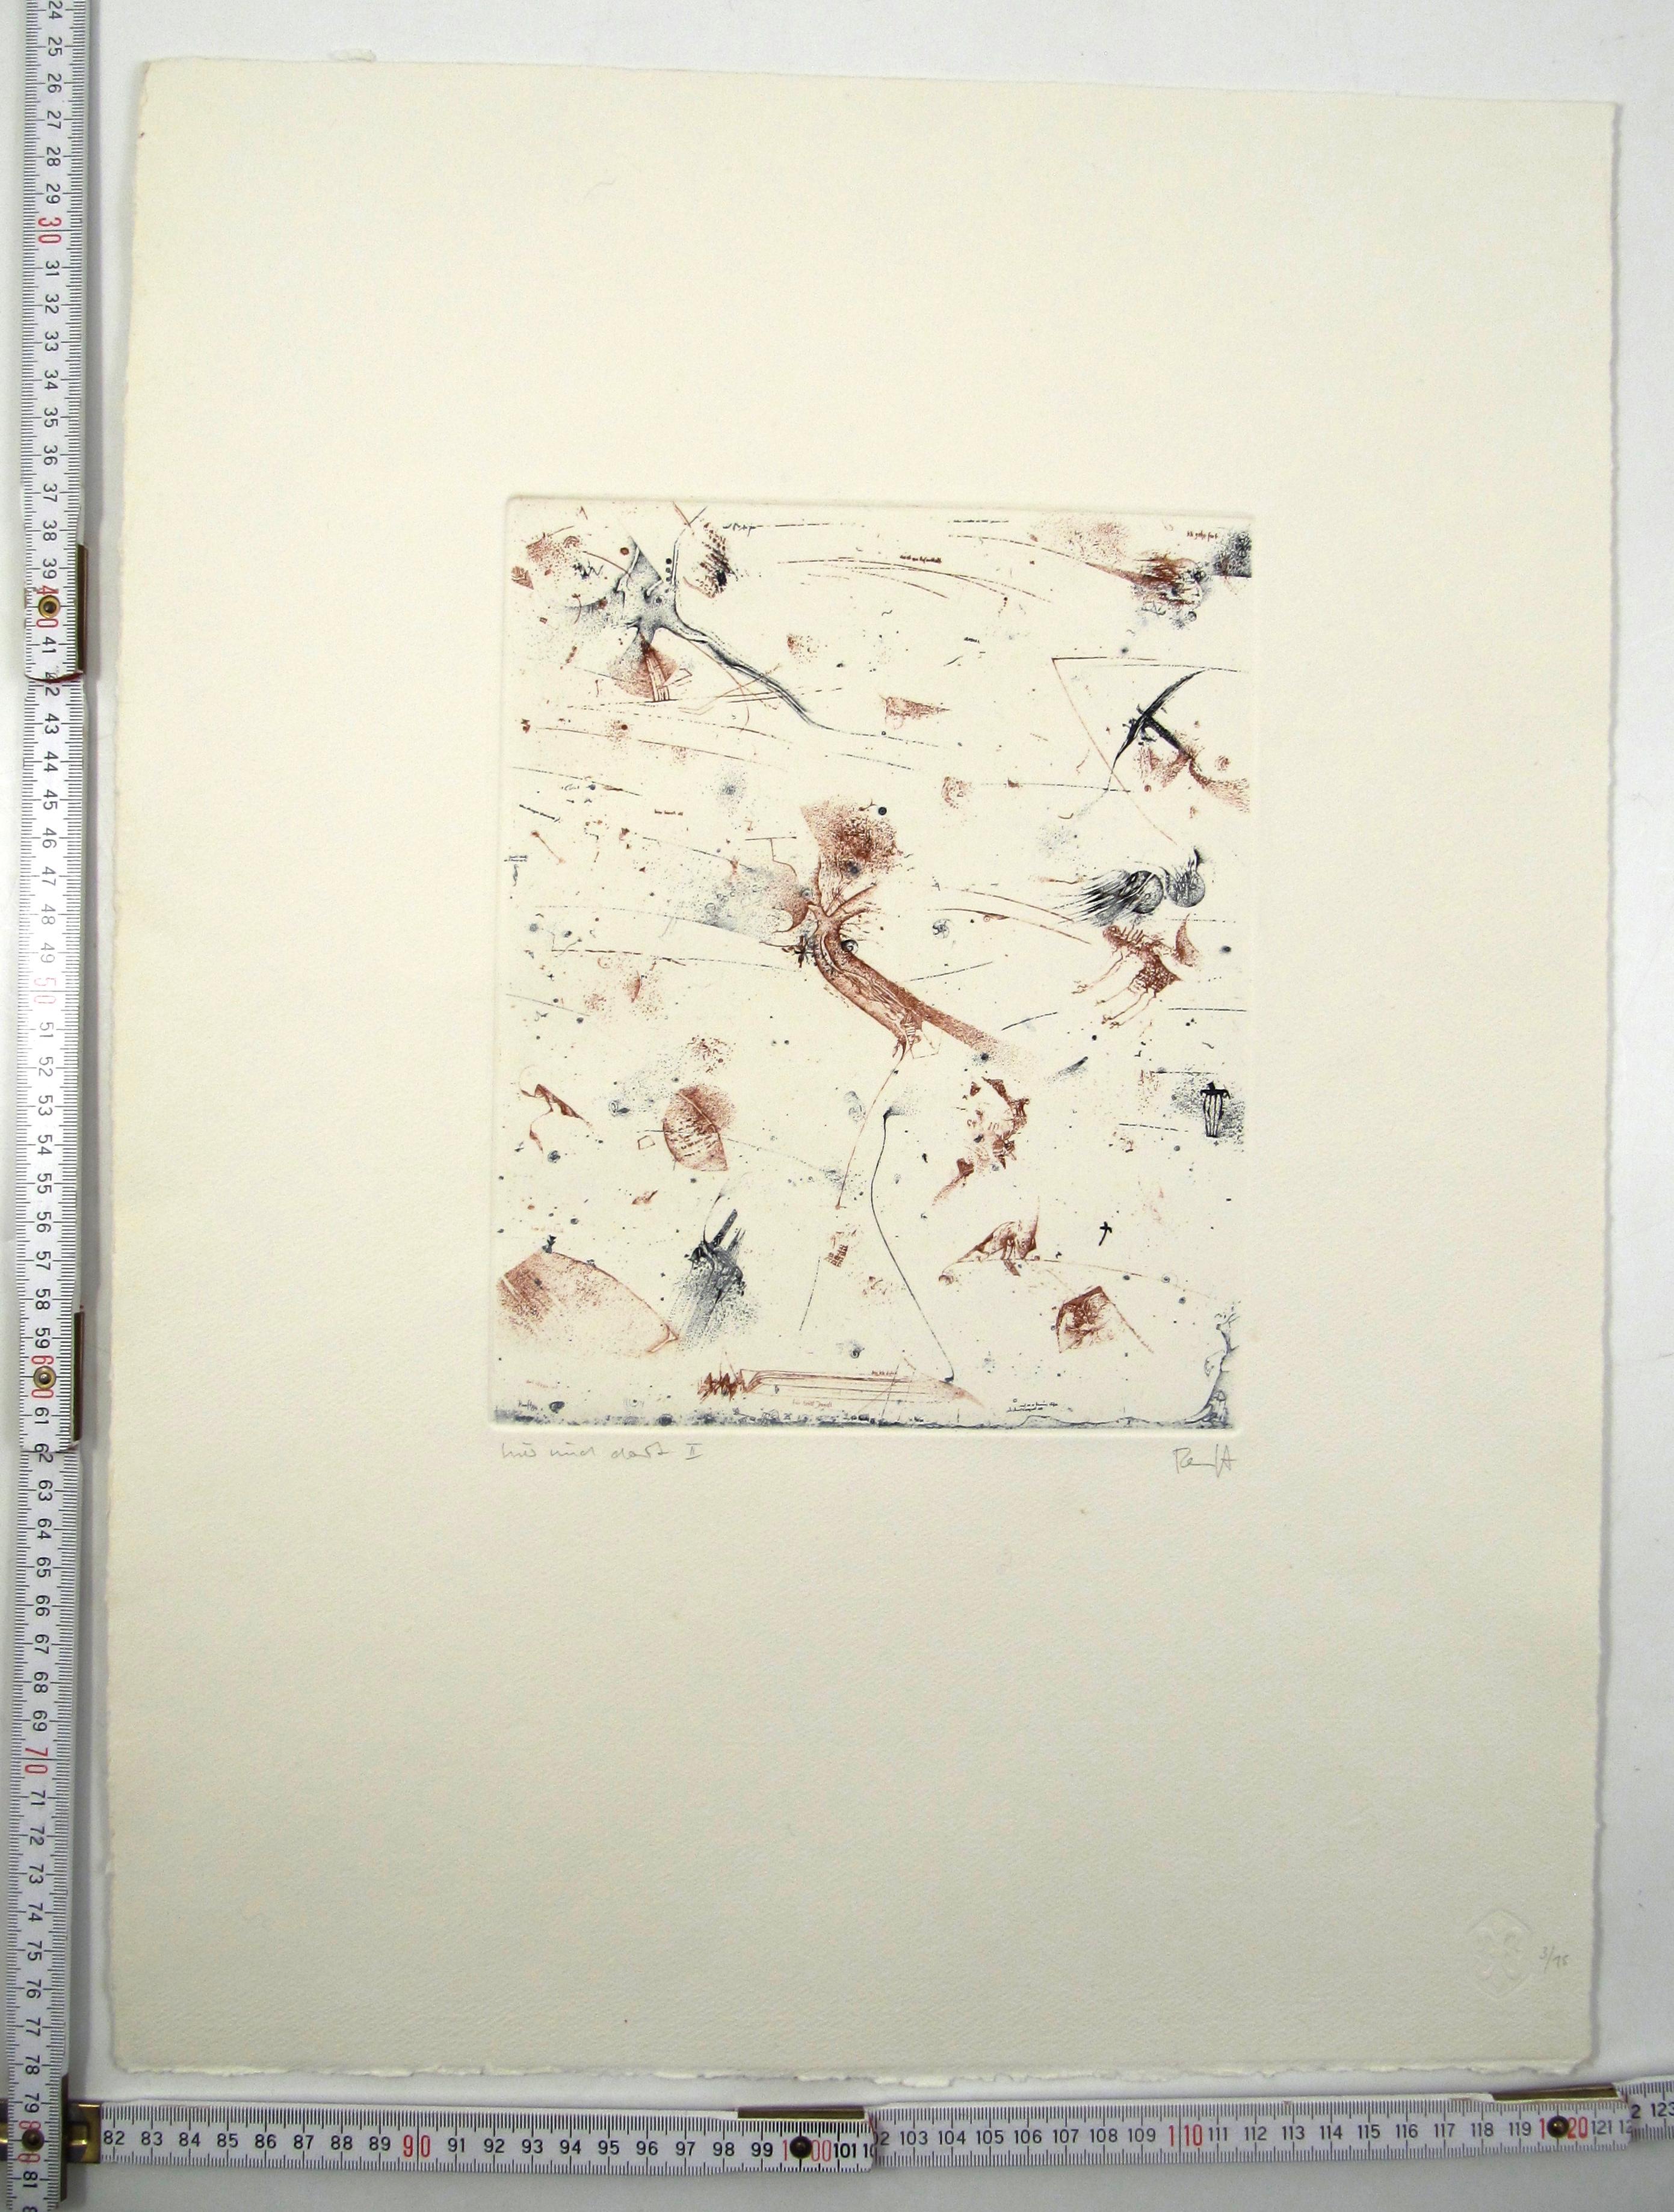 Thomas Ranft (1945) - Hier und dort II, 1984 - Abstract Etching - Edition 3 / 15 For Sale 5